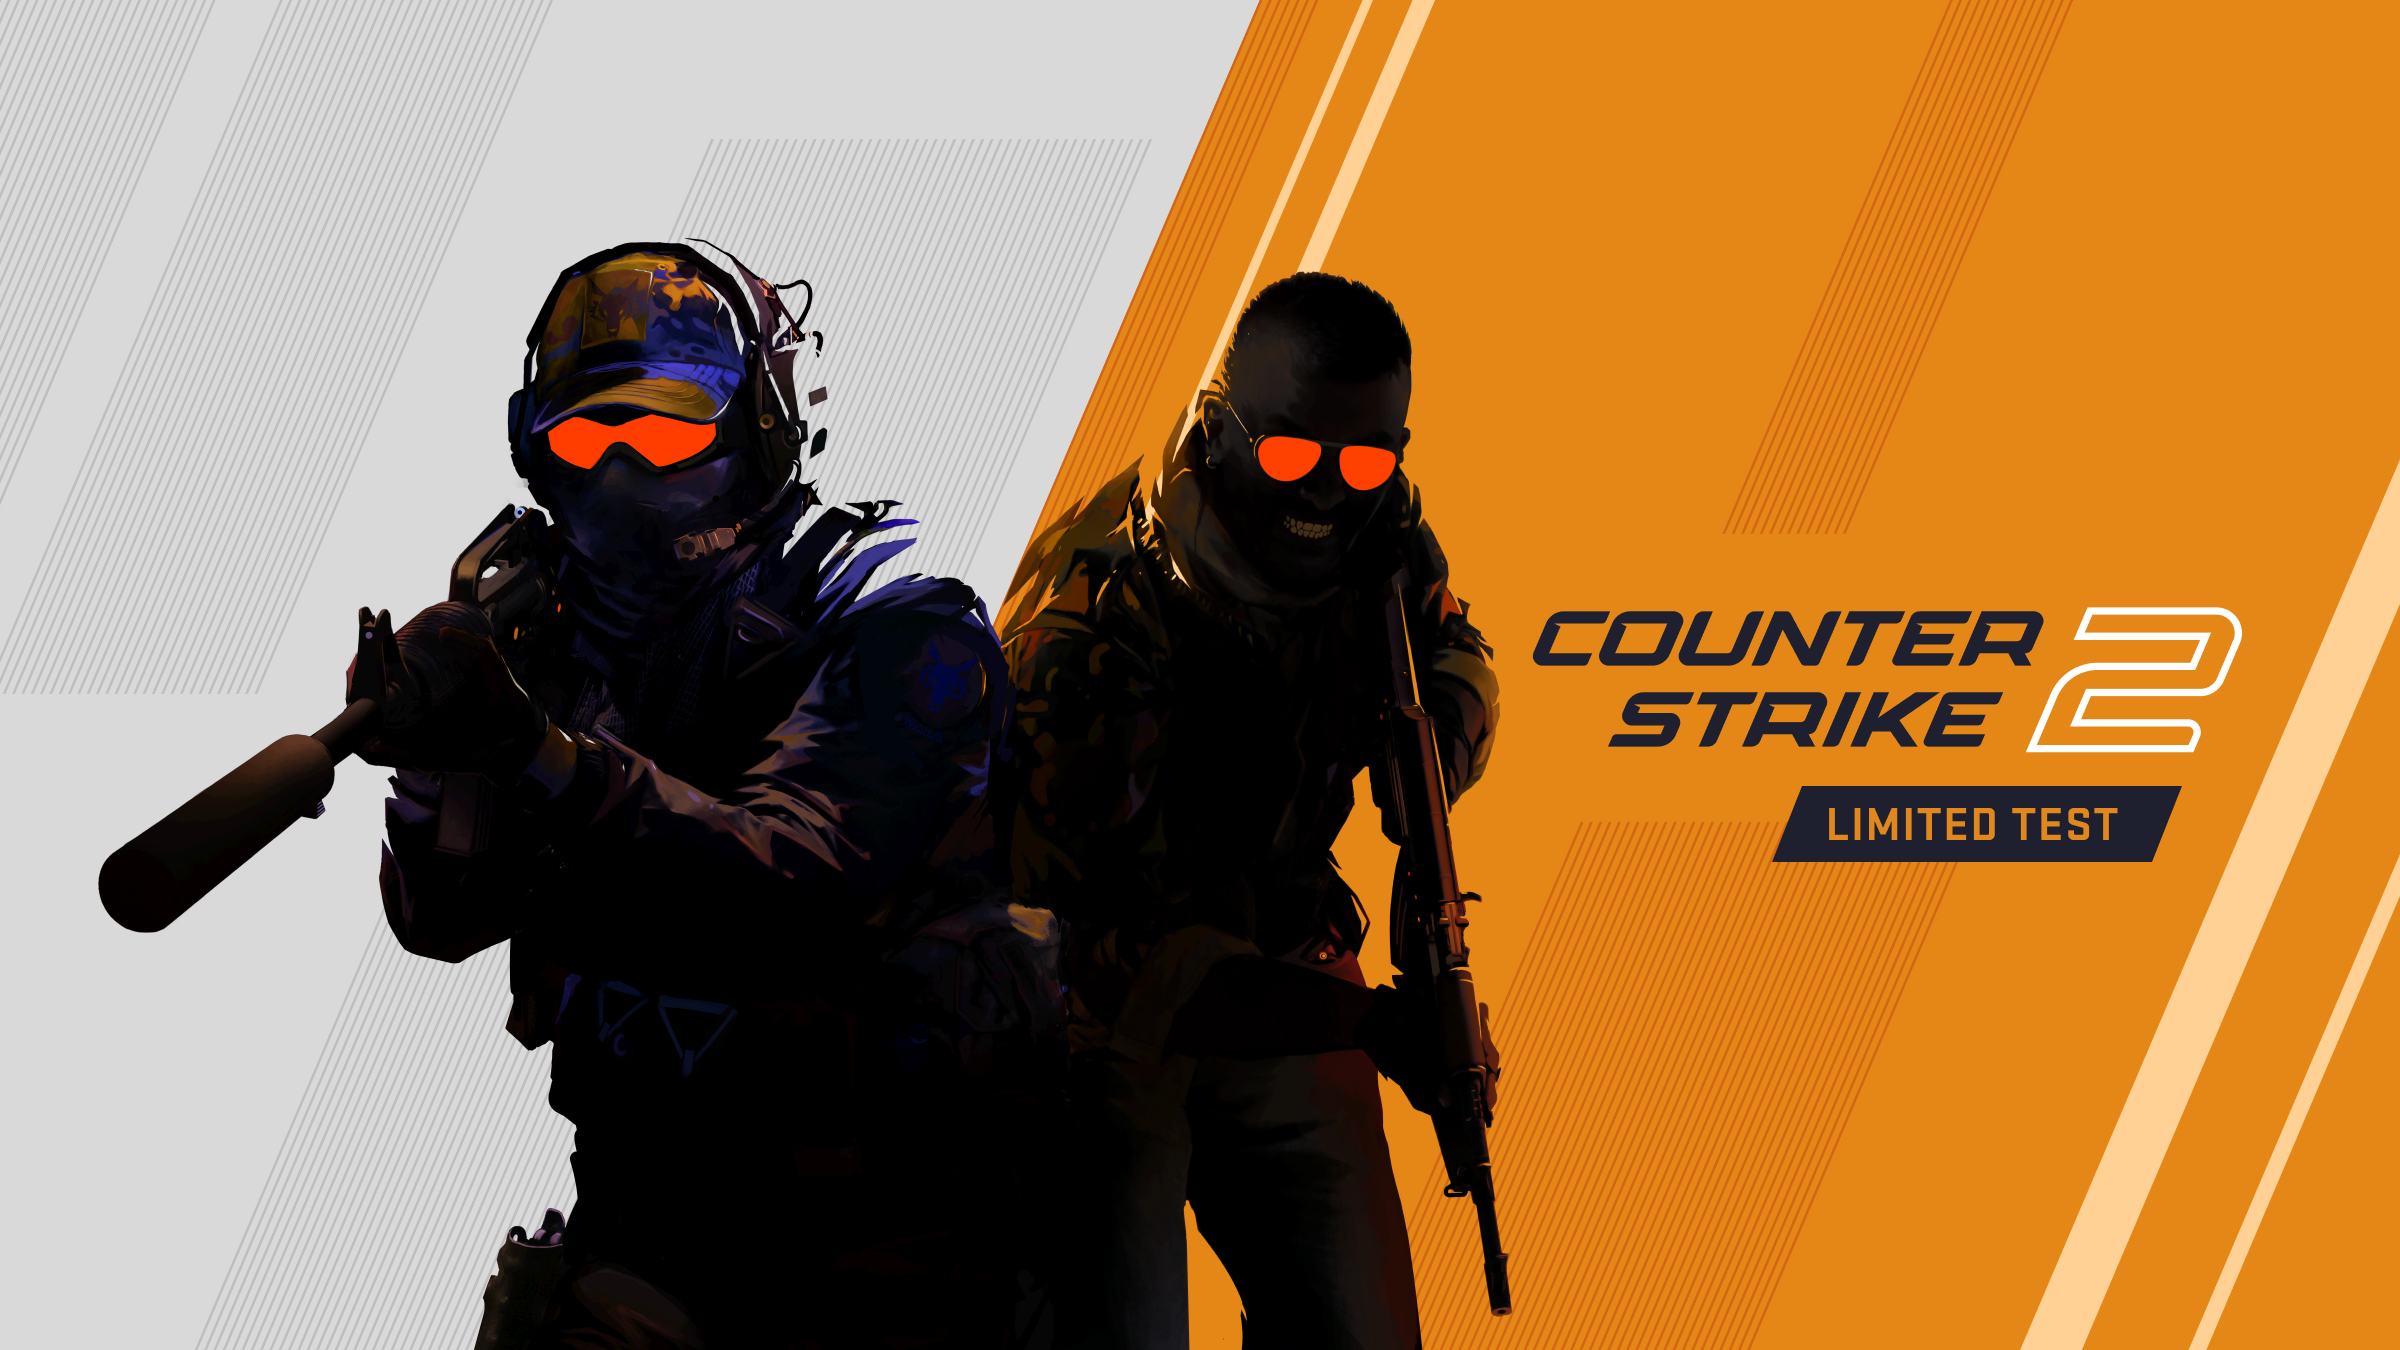 Counter-Strike 2 is the largest technical leap forward in Counter-Strike’s history, ensuring new features and updates for years to come.